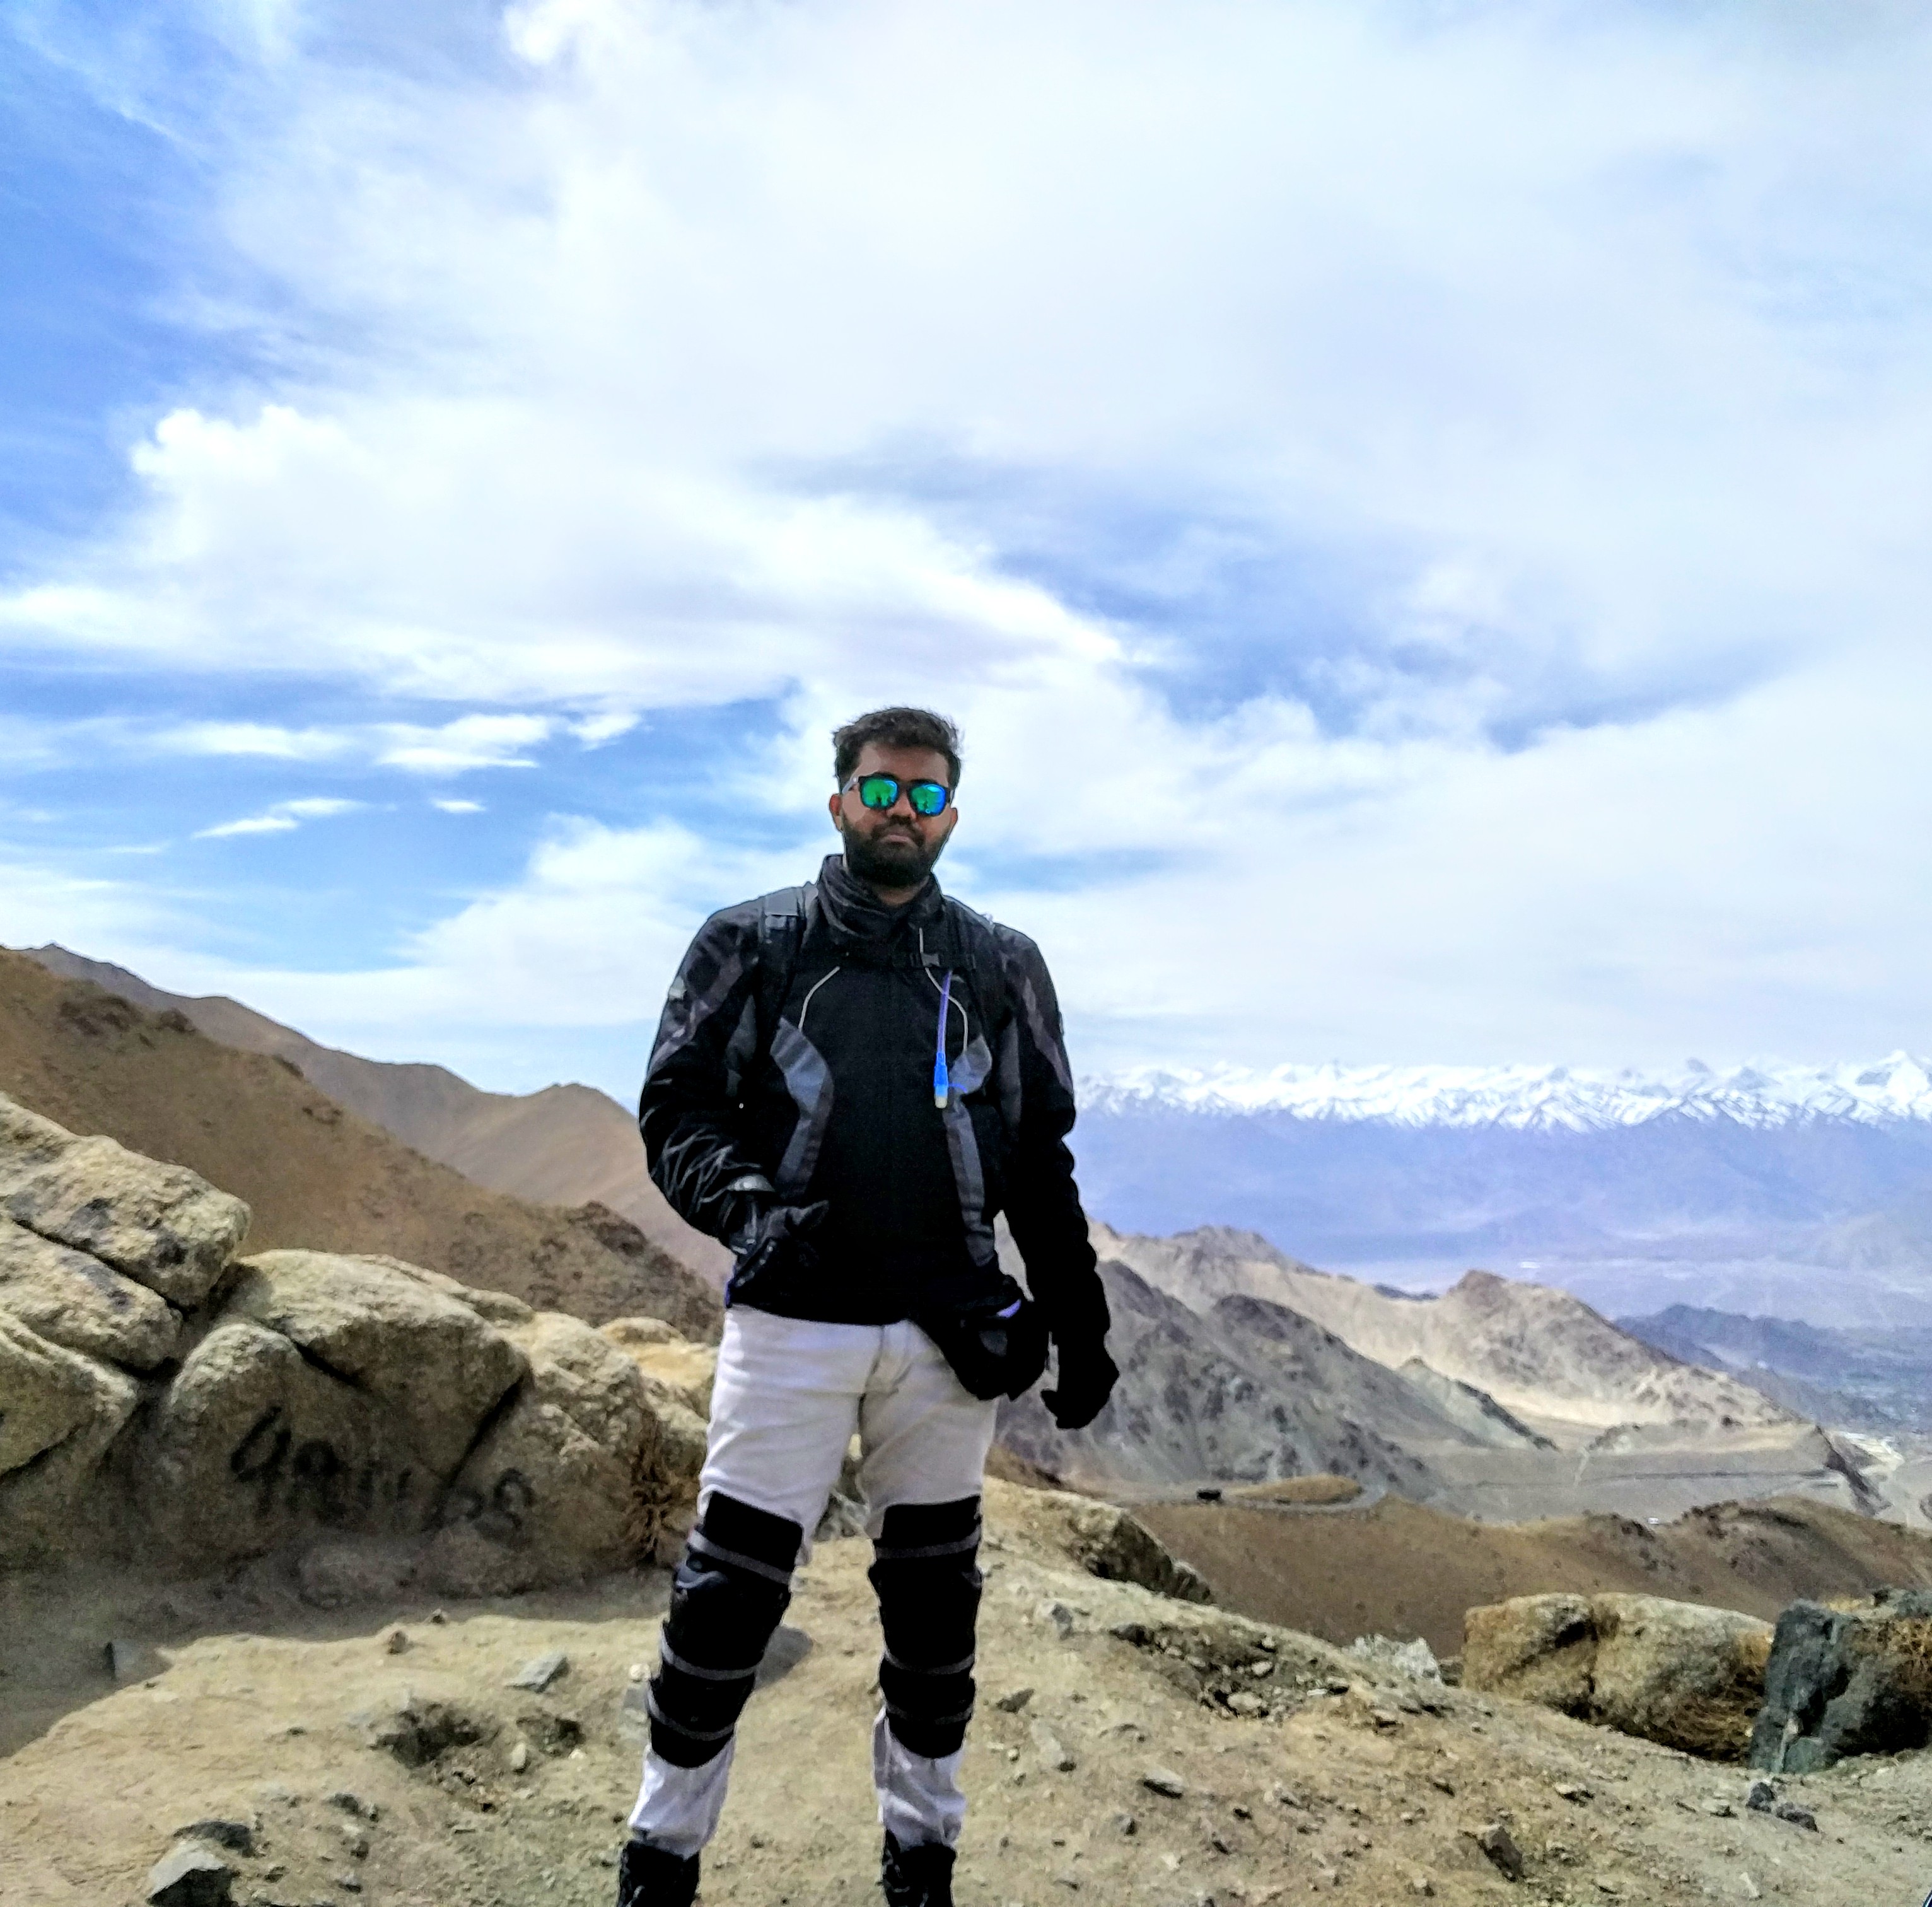 Dr. Nischal’s Thrilling Royal Enfield Expedition To Ladakh With Thrillophilia!